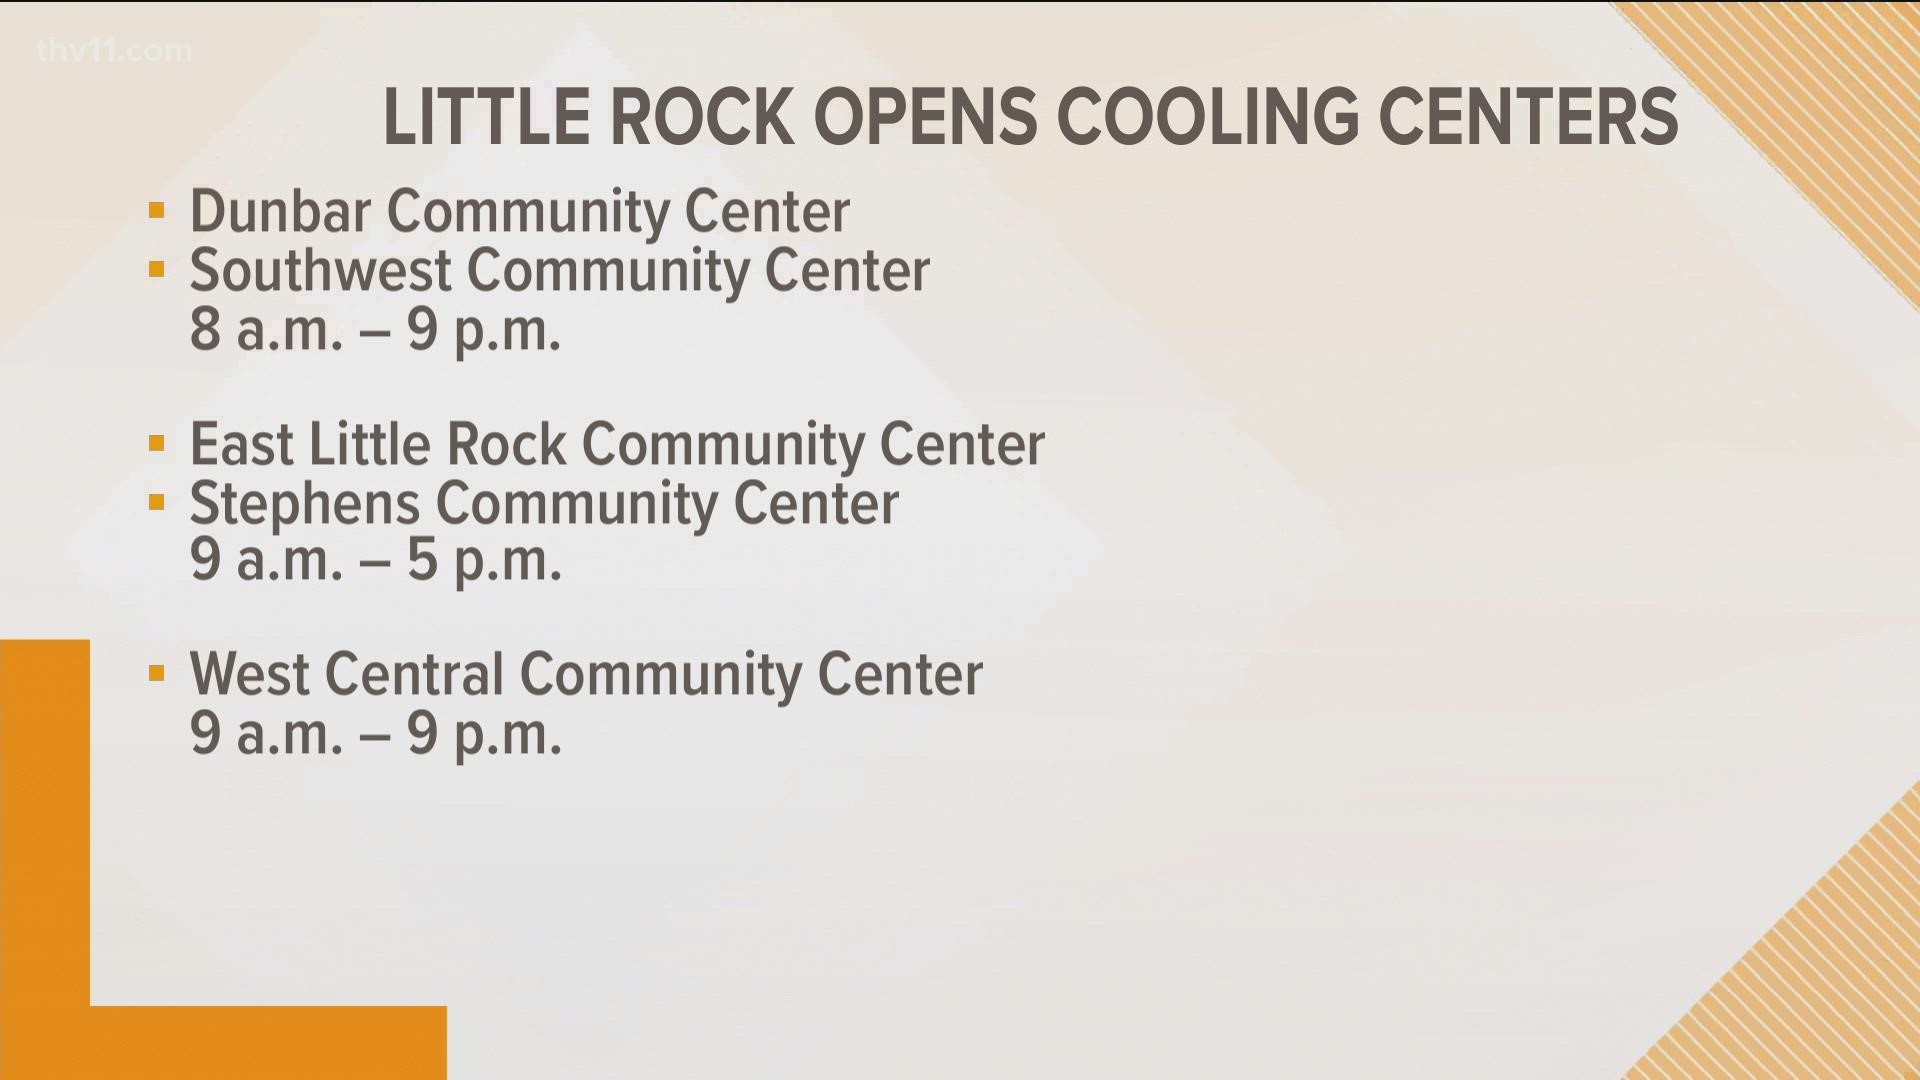 Little Rock is reopening cooling centers to combat the heat.